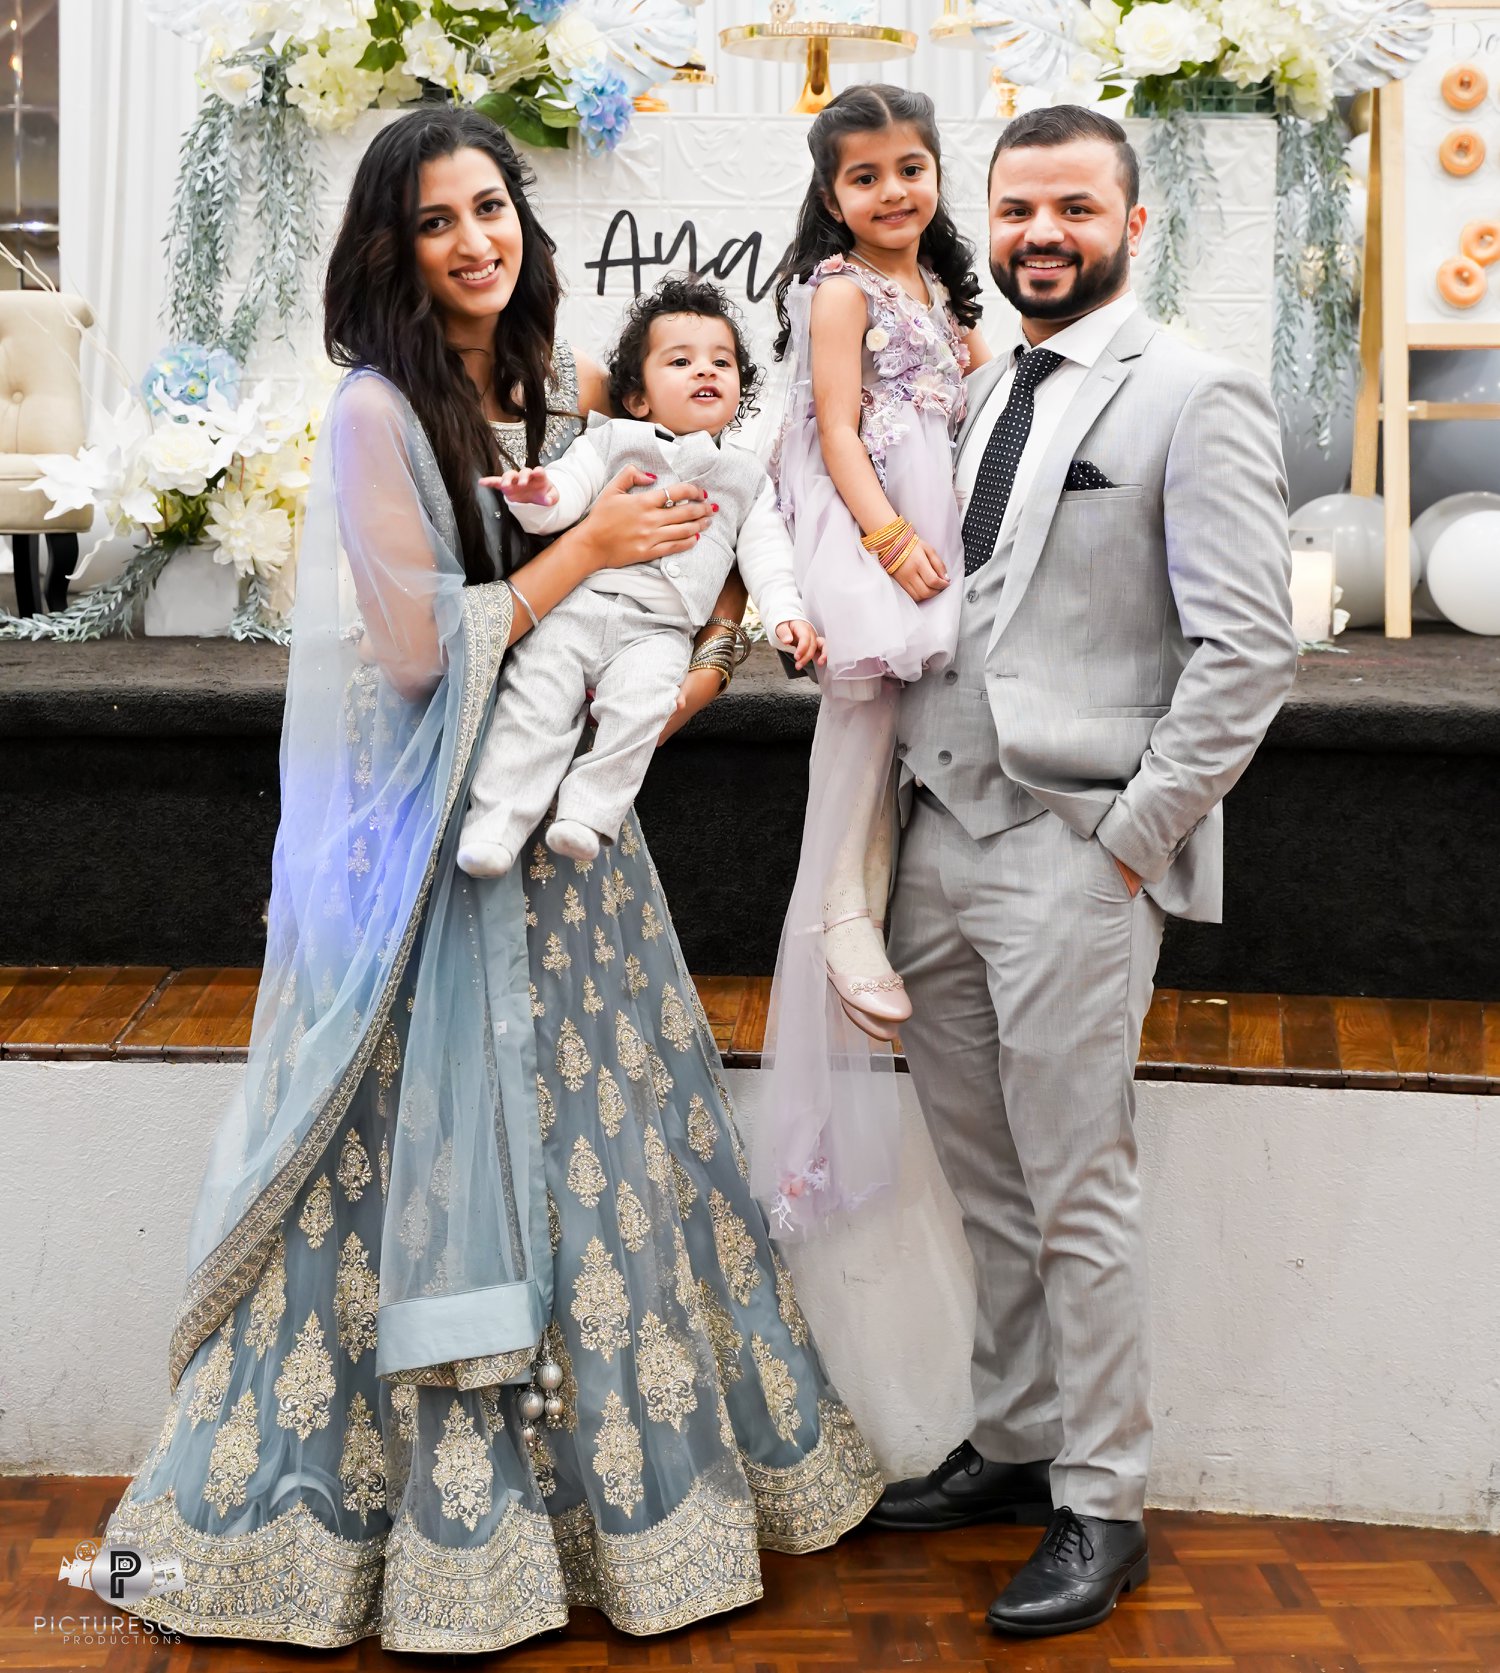 Melbourne-based lawyer Mannie Kaur Verma with her husband and their children.